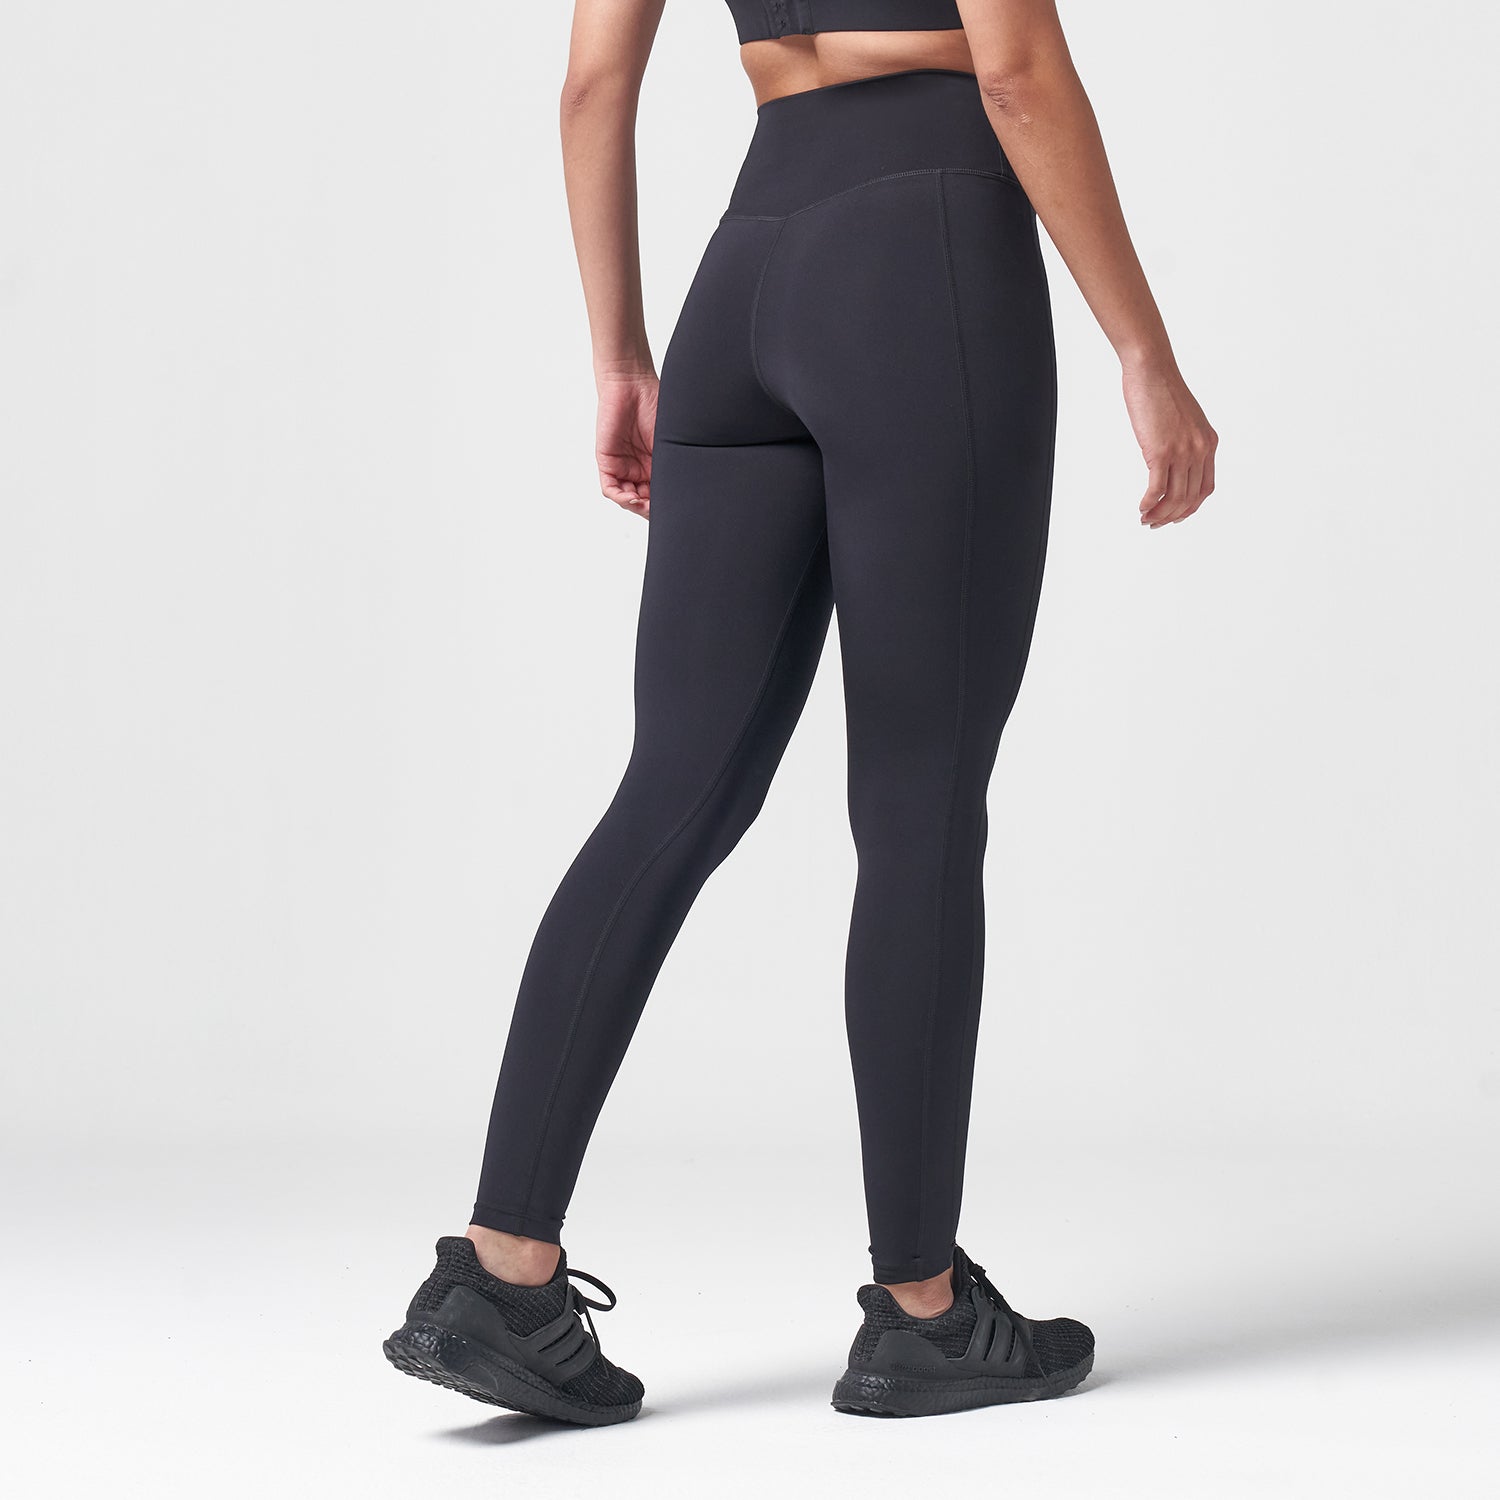 Gym Leggings for Women ZIP IT! Black-Pink E-store repinpeace.com - Polish  manufacturer of sportswear for fitness, Crossfit, gym, running. Quick  delivery and easy return and exchange